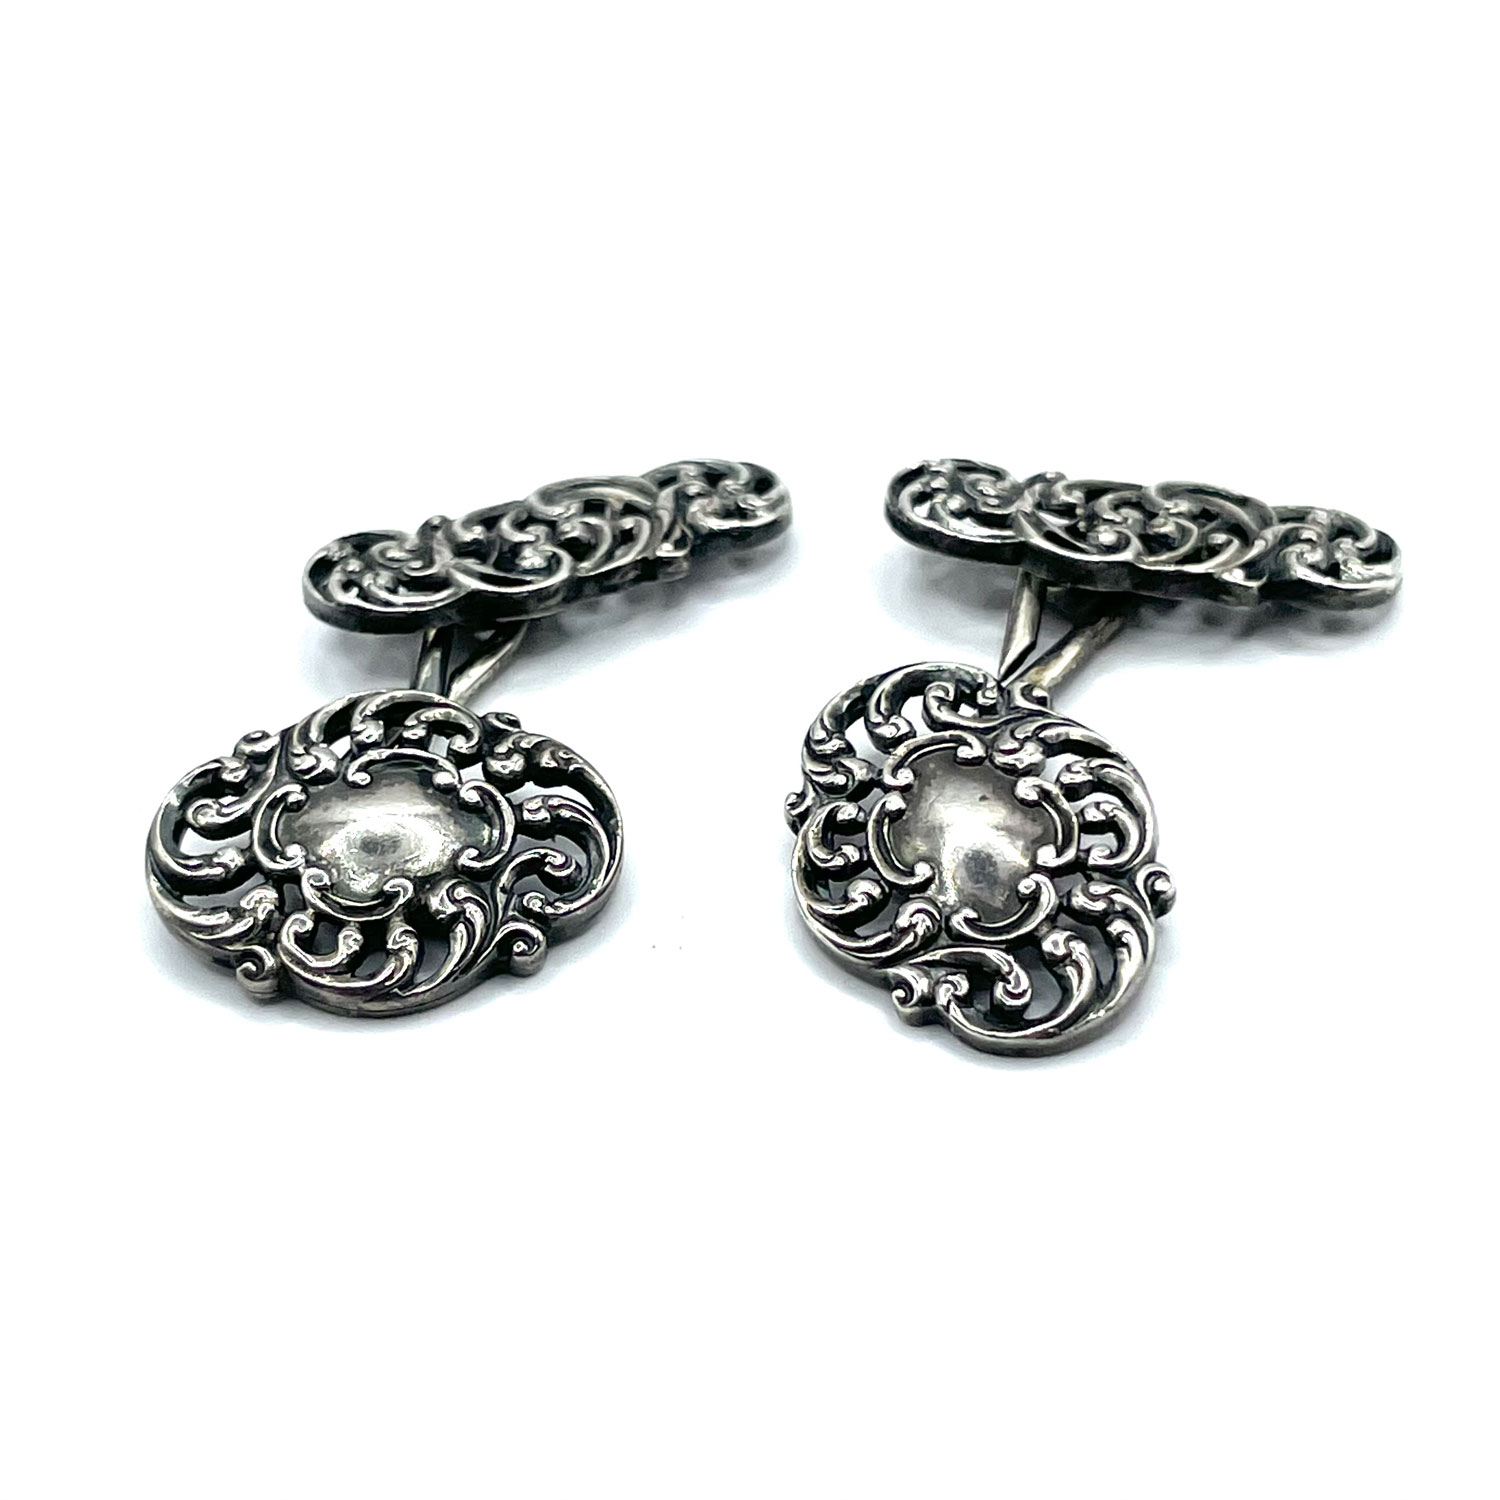 Victorian sterling silver cuff links